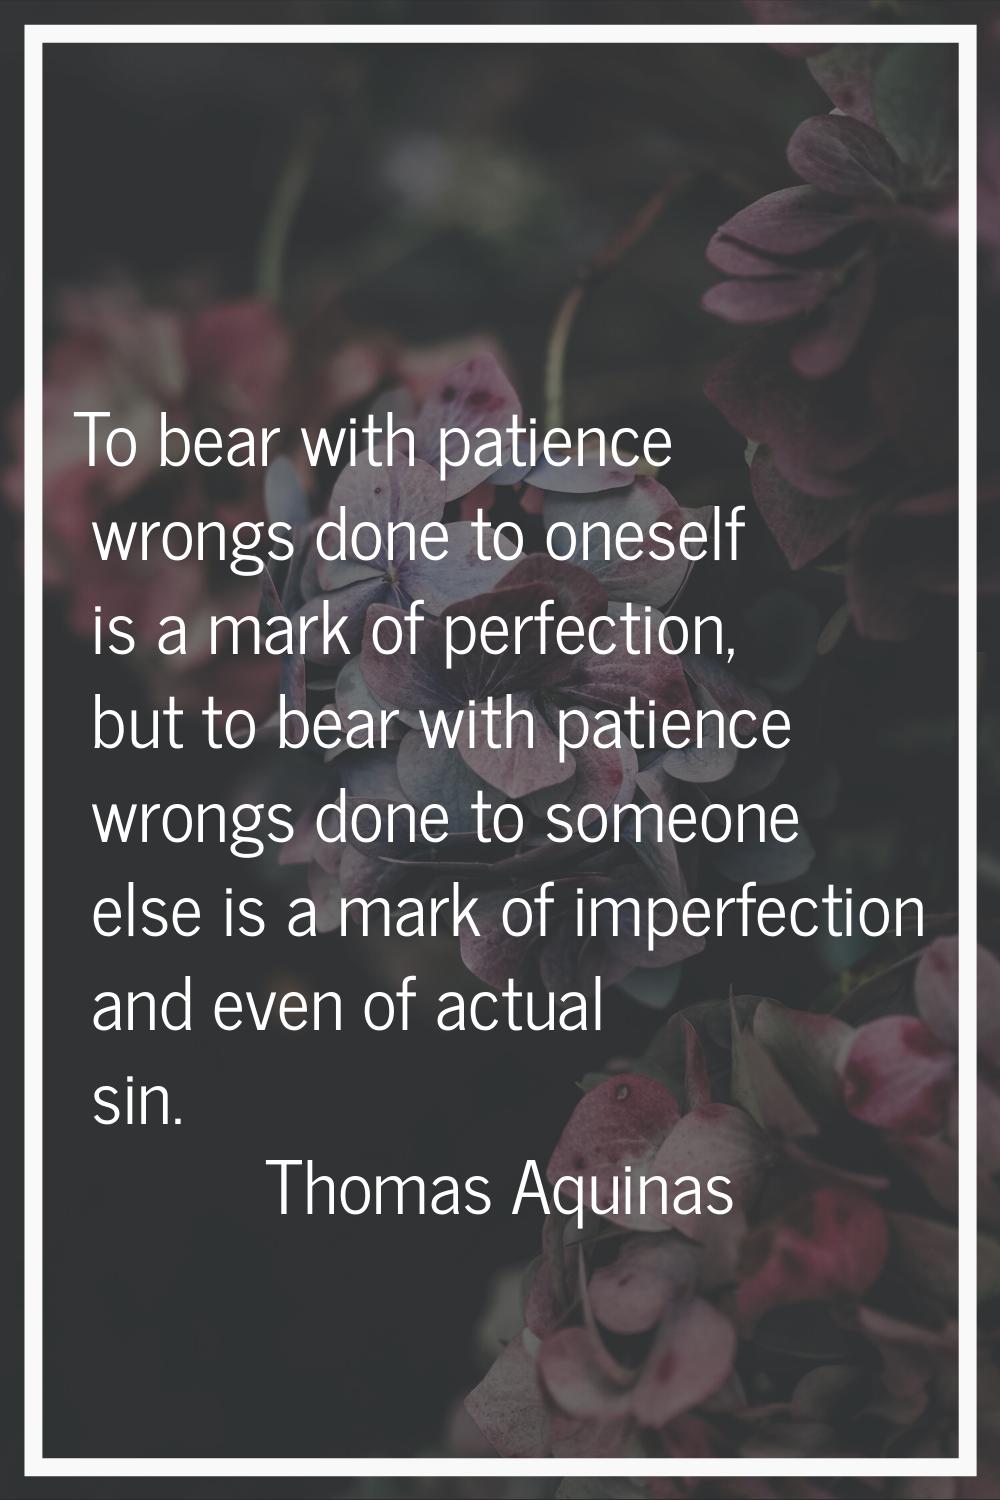 To bear with patience wrongs done to oneself is a mark of perfection, but to bear with patience wro